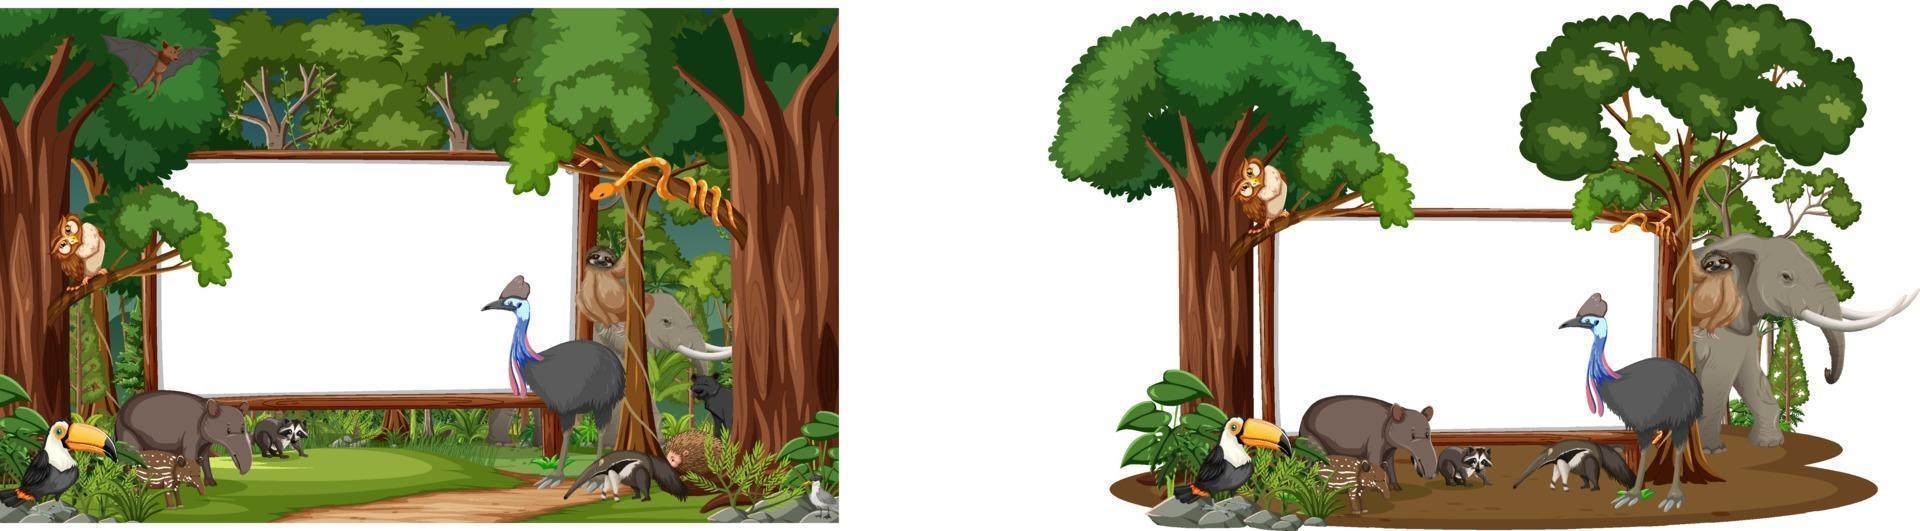 Empty banner set with wild animals and rainforest trees vector